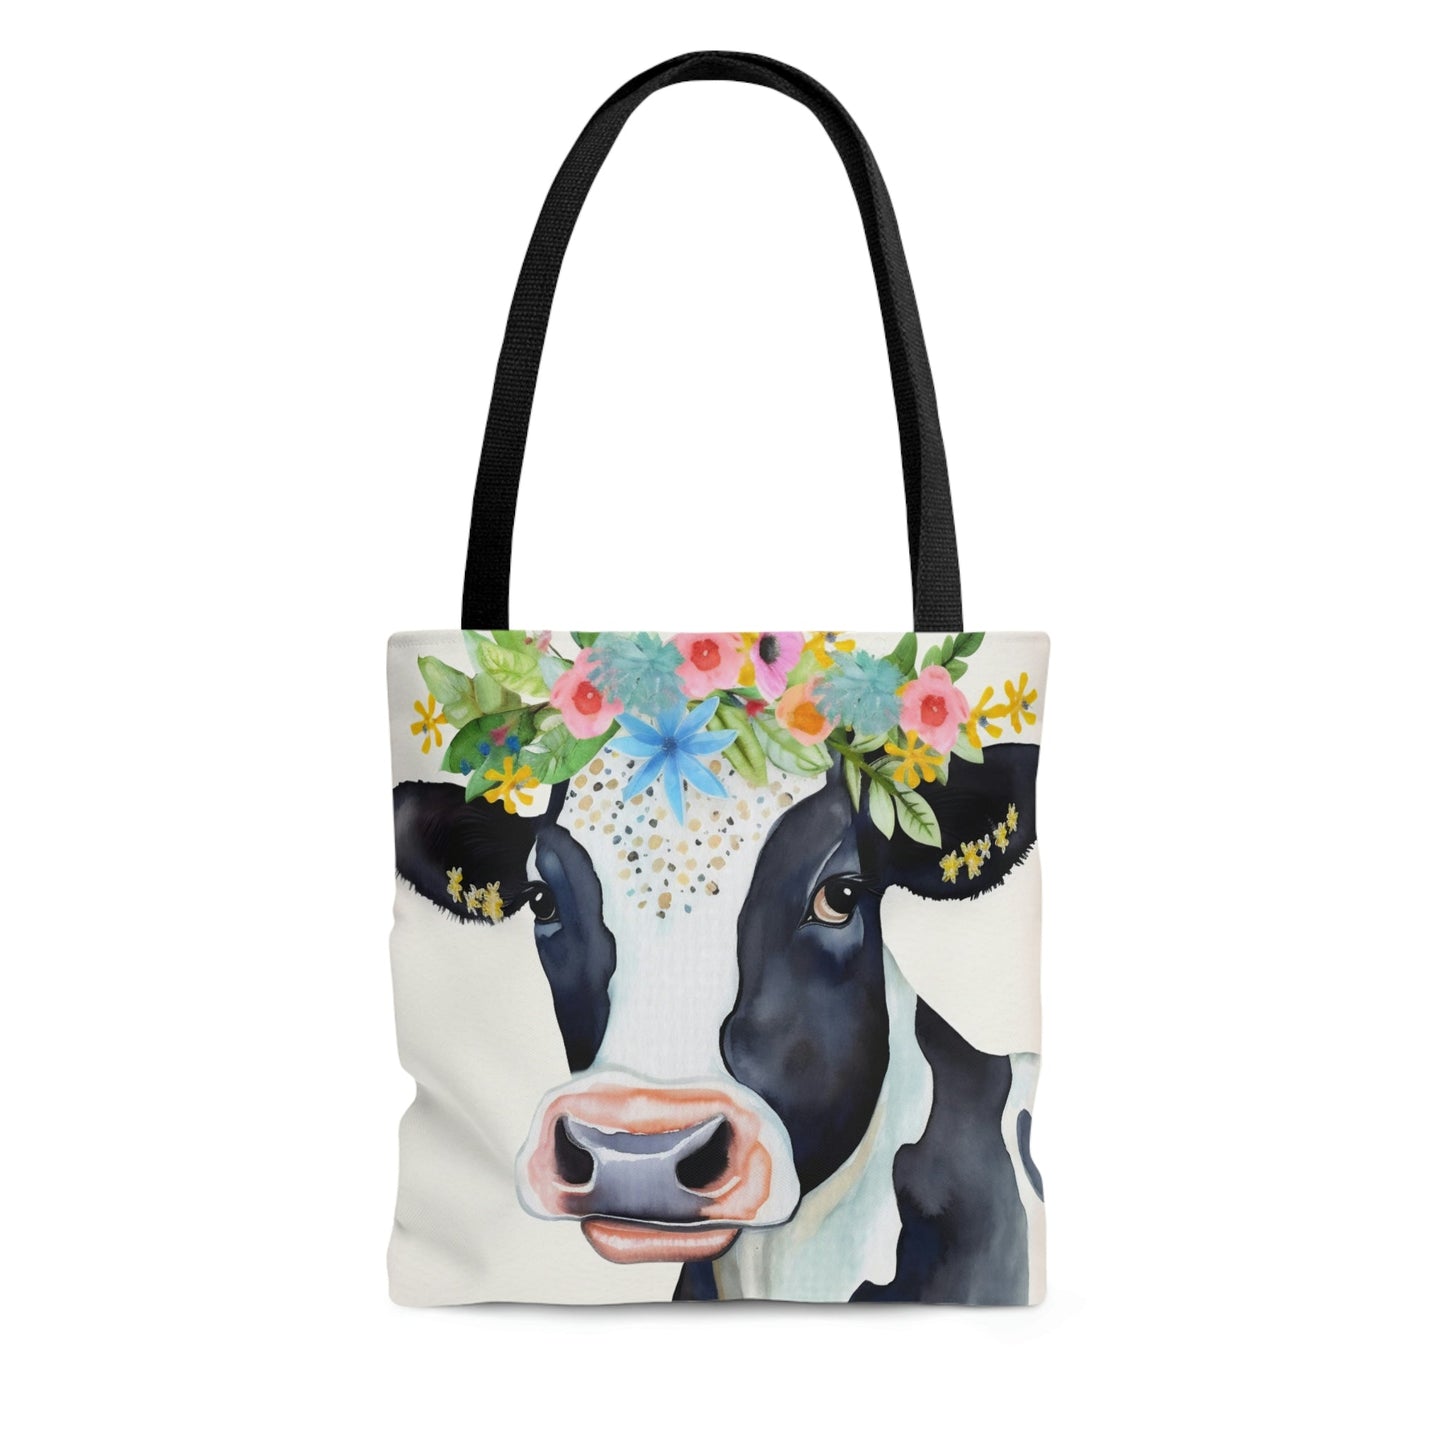 Folk Art Holstein Cow Tote Bag - Cute Cottagecore Totebag Makes the Perfect Gift